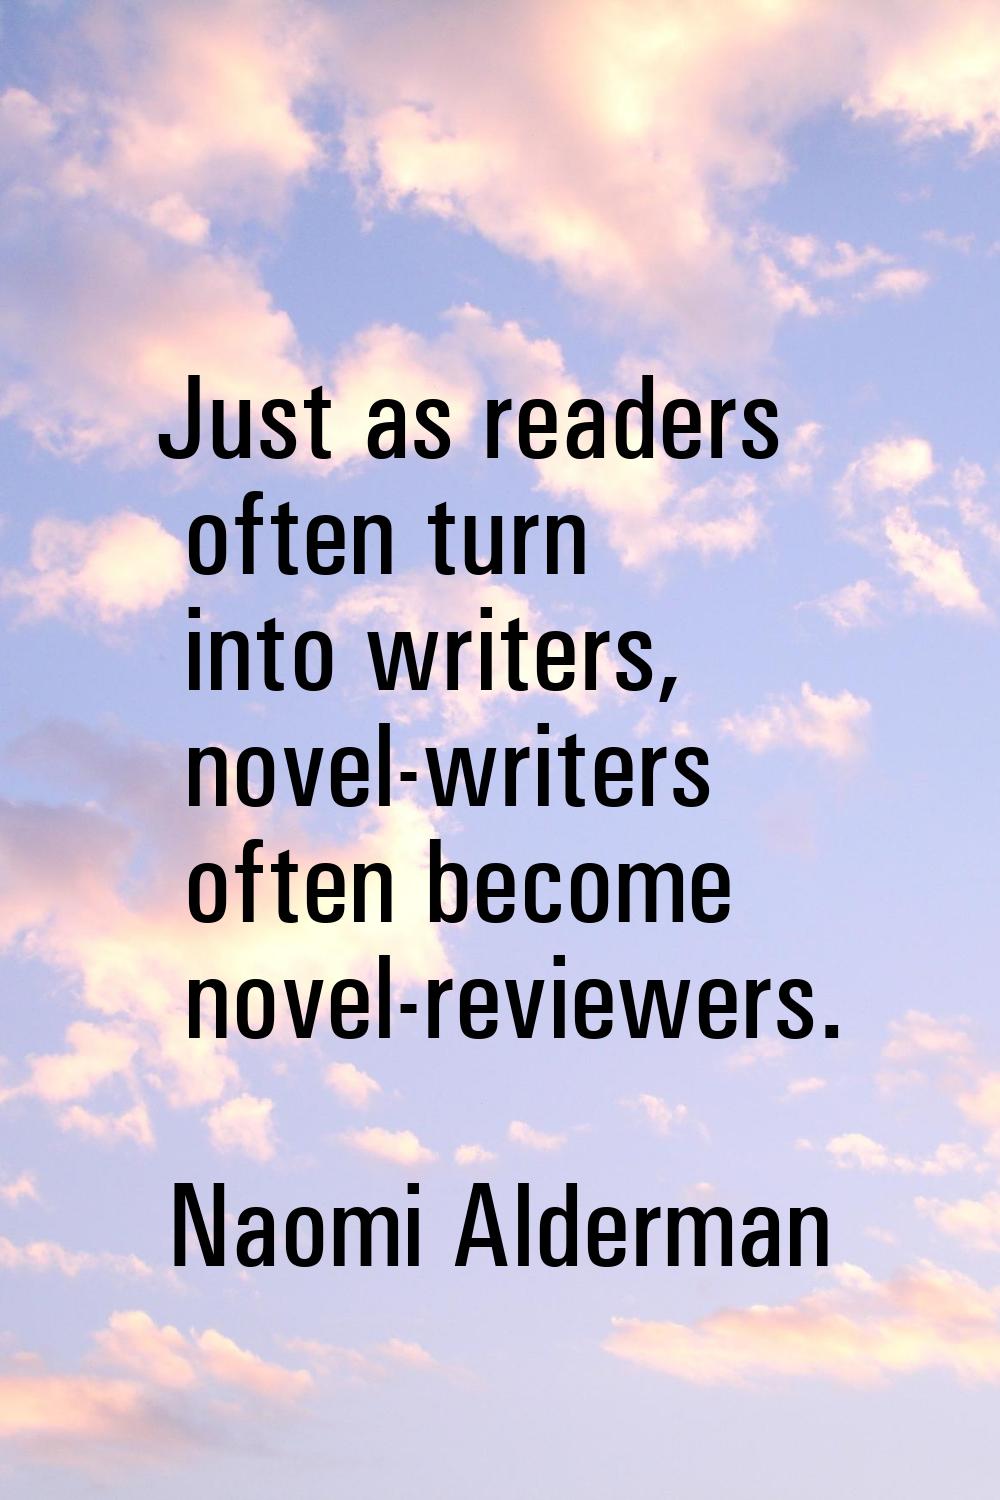 Just as readers often turn into writers, novel-writers often become novel-reviewers.